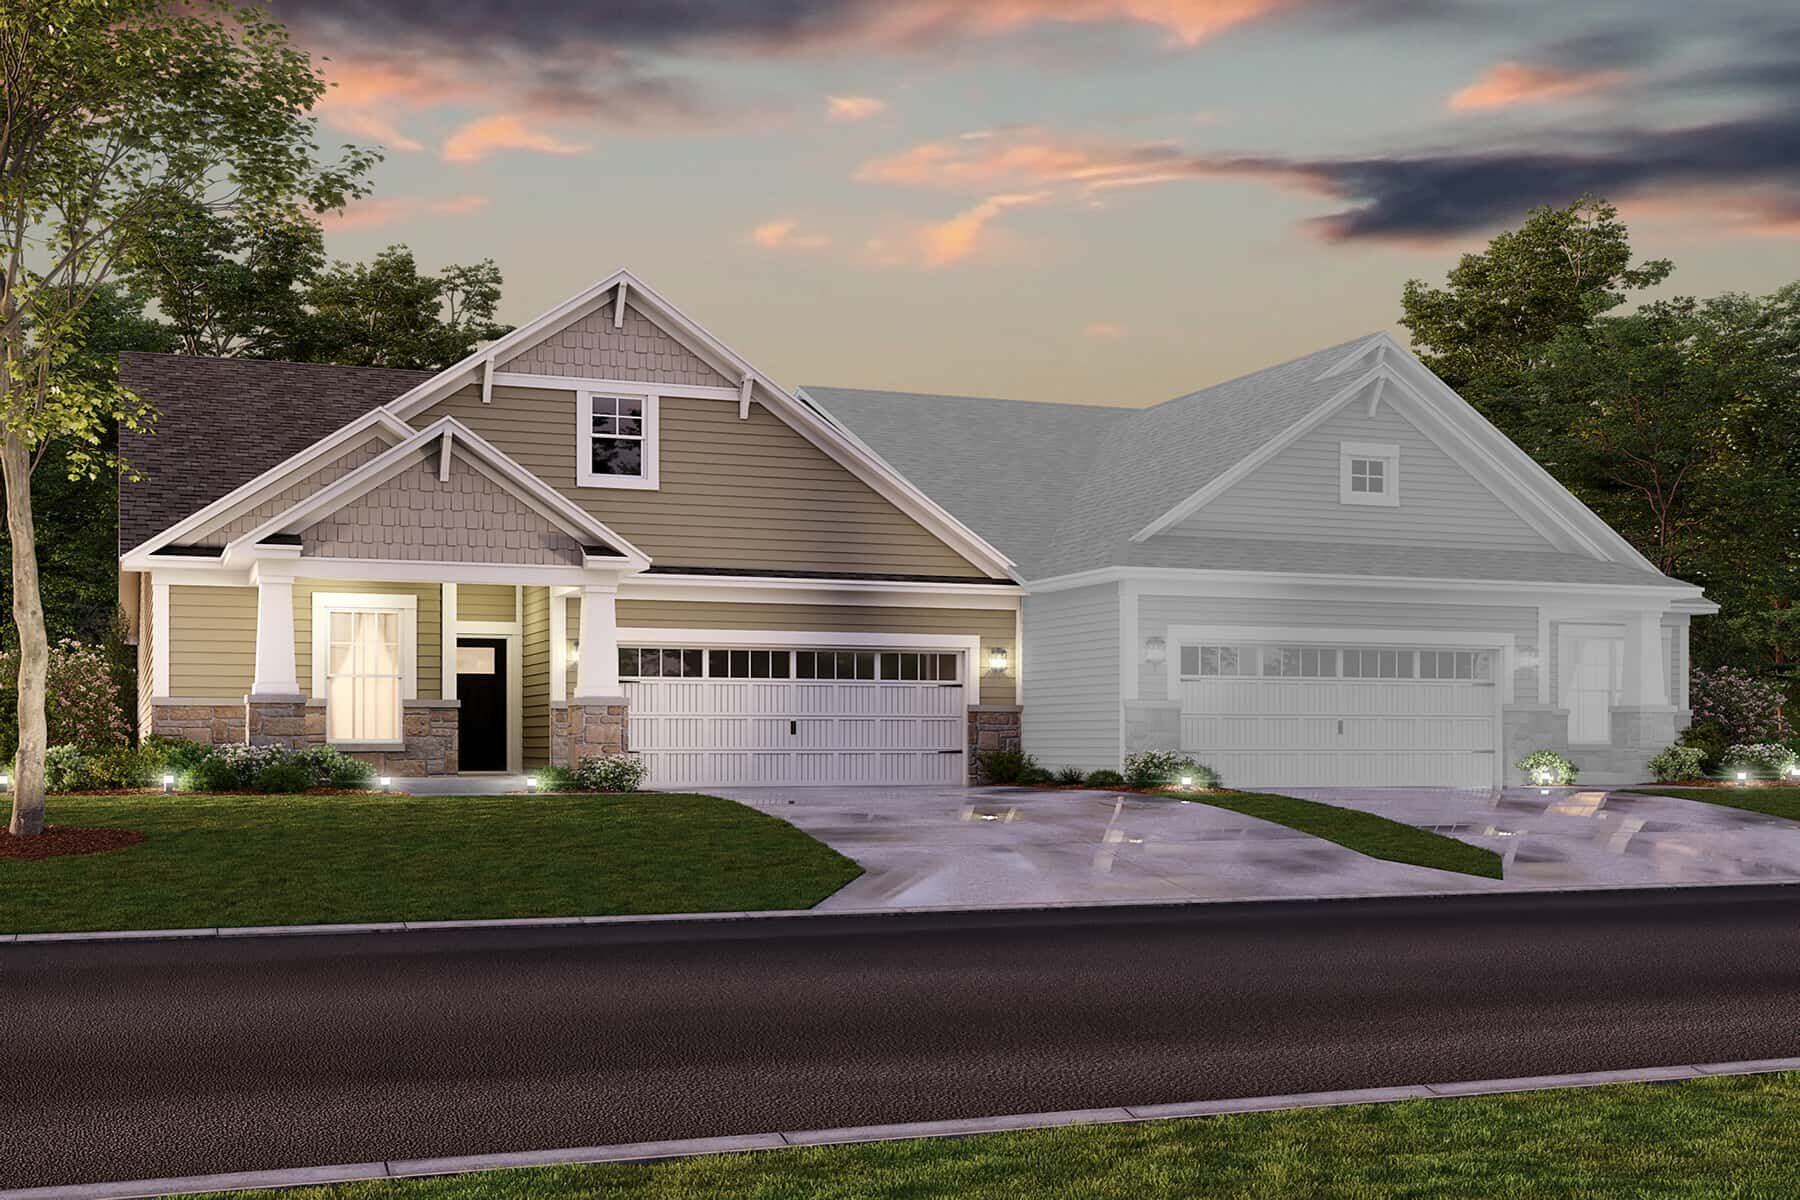 New Homes in Noblesville Homes - The M/I Vista Bella - (Plan)